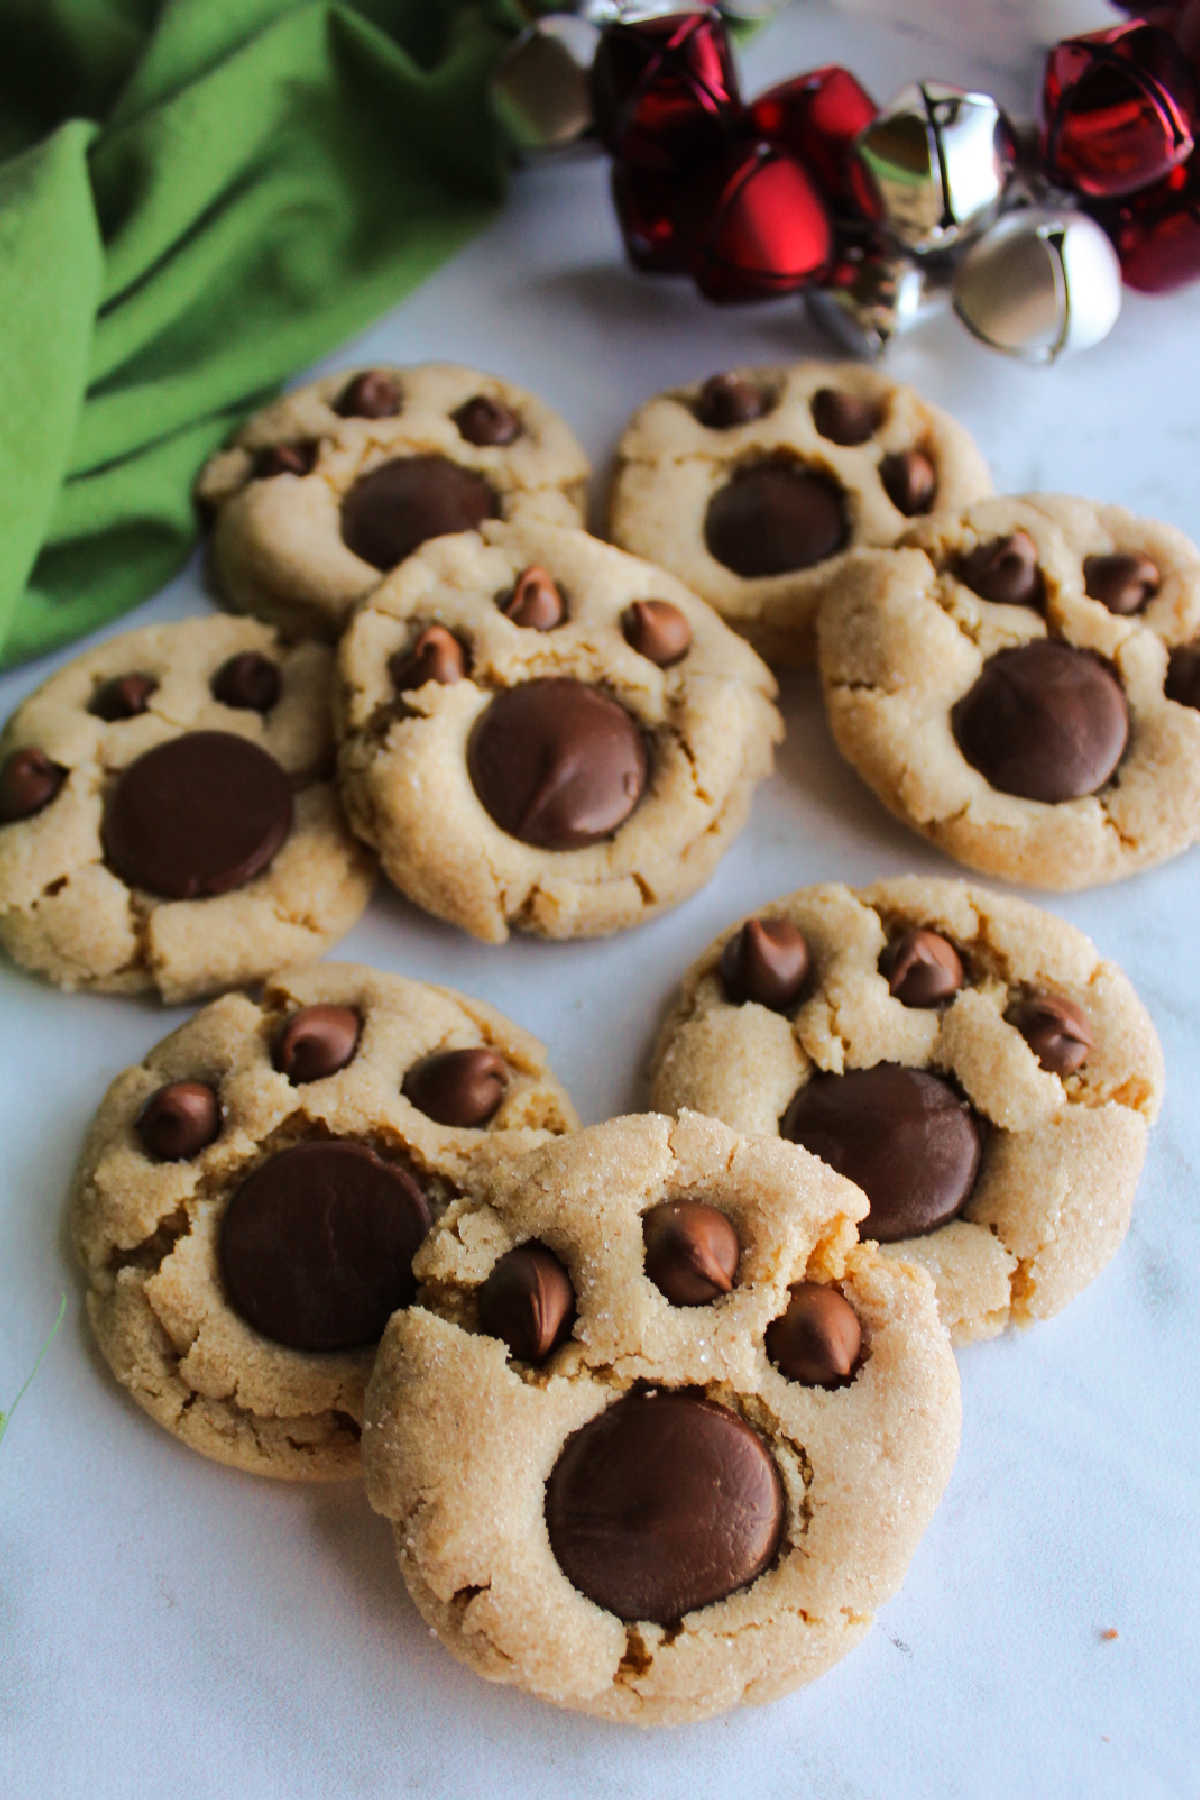 Freshly baked peanut butter bear paw cookies with chocolate decorations ready to eat.